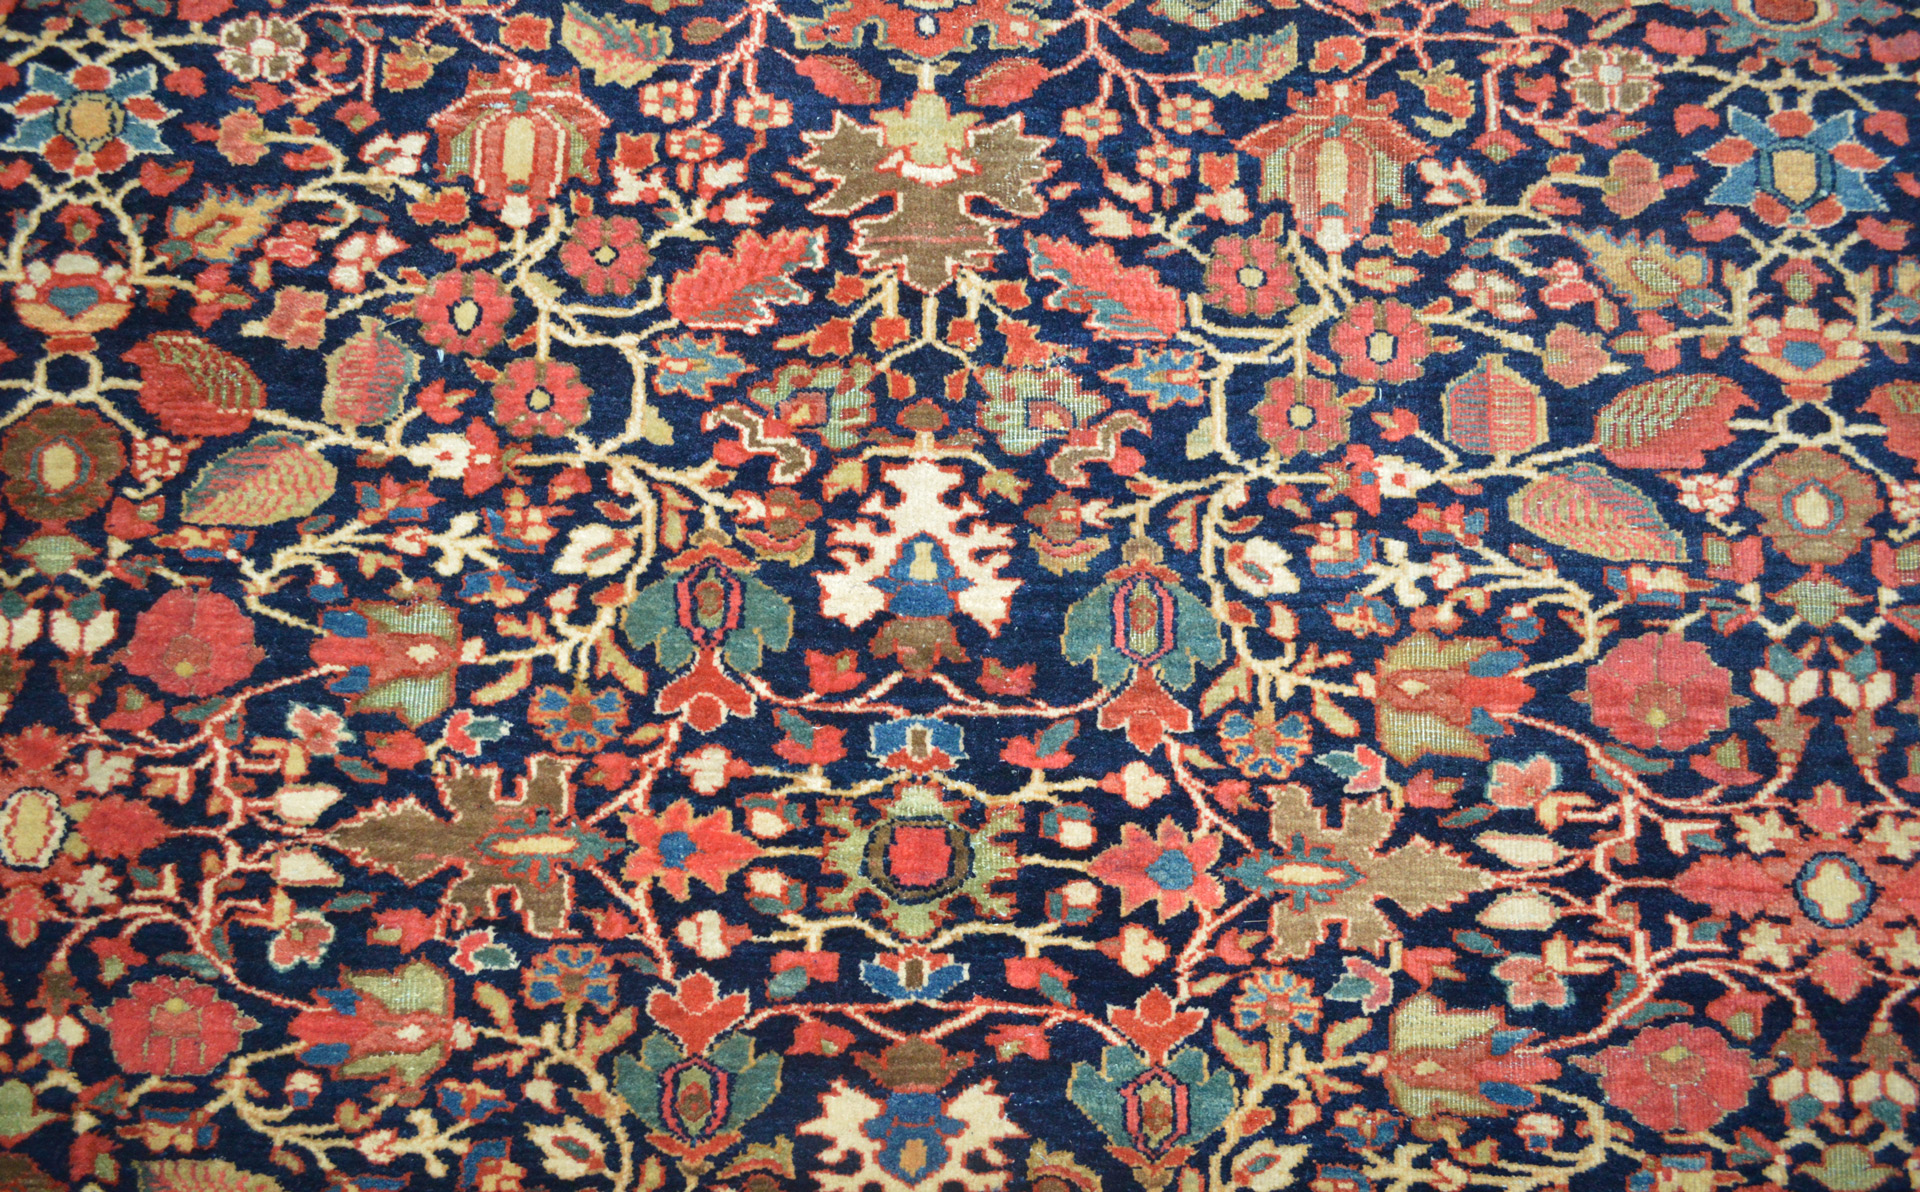 Antique Fereghan Sarouk carpet, central Persia, circa 1910 with an all-over floral design on a navy blue field. This Fereghan Sarouk carpet features a beautiful, wide border that frames the field well. Douglas Stock Gallery, antique Persian carpets, Boston,MA area, New England, antique Oriental rugs